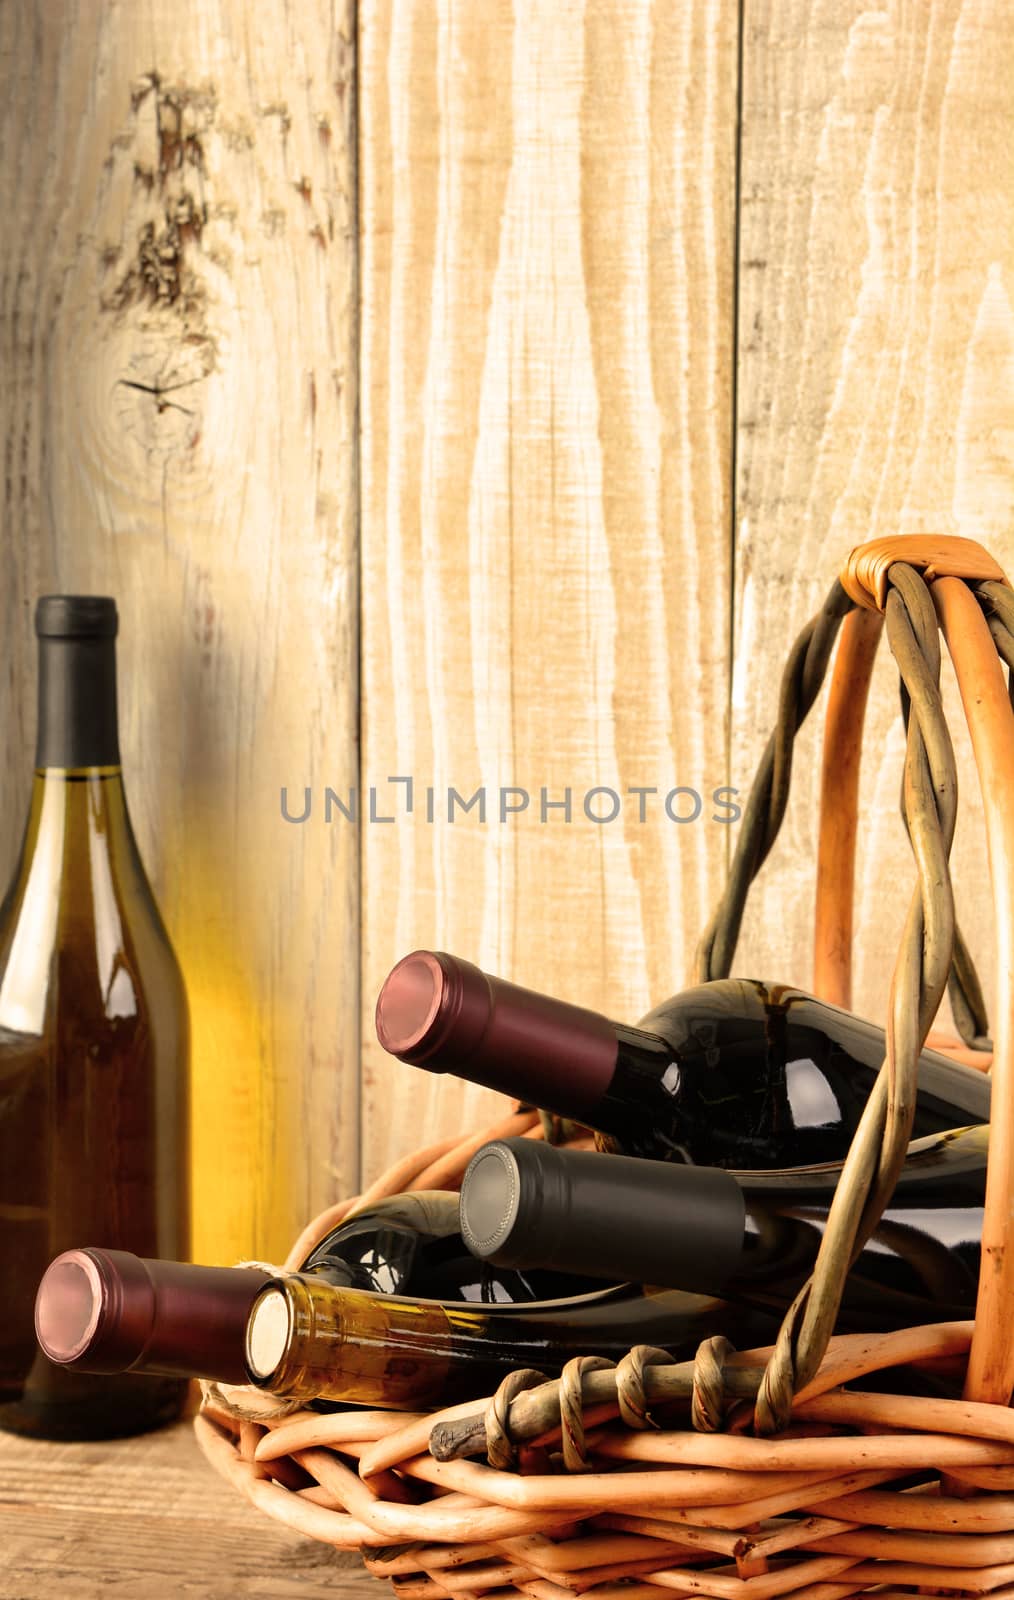 Closeup of a wine still life with warm afternoon window light. A basket with assorted bottles and a chardonnay bottle in the corner against a rustic wood background. Bottles have no labels.